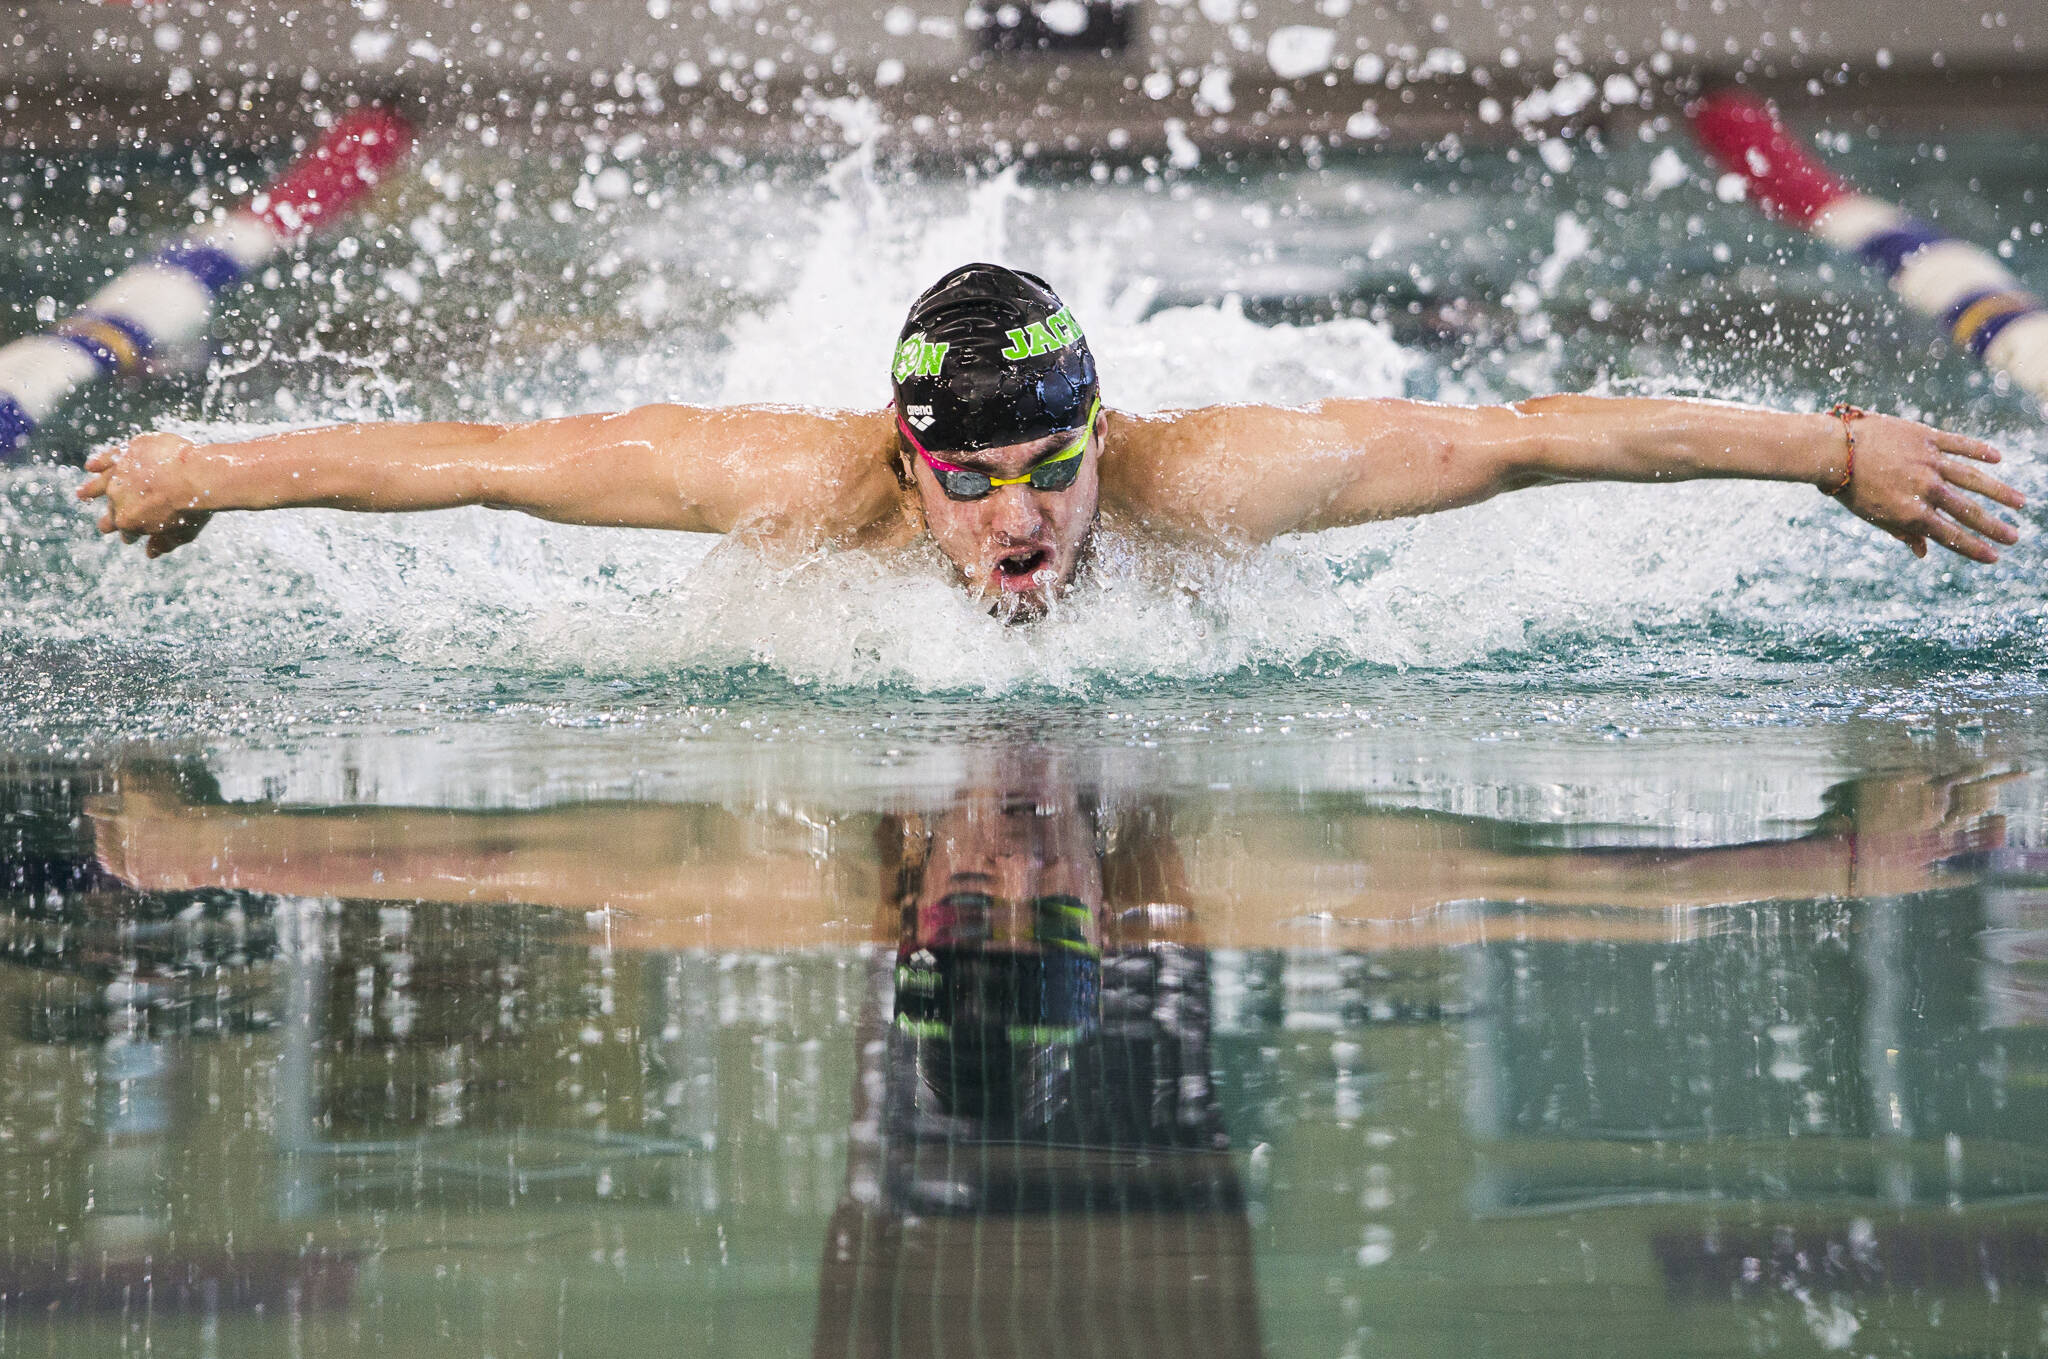 Alex Georgiev swims in the 100 Yard Butterfly during the 4A Boys Districts swim meet on Saturday, Feb. 12, 2022 in Snohomish, Wa. Georgiev won the 100 Yard Butterdly and set a new meet record. (Olivia Vanni / The Herald)